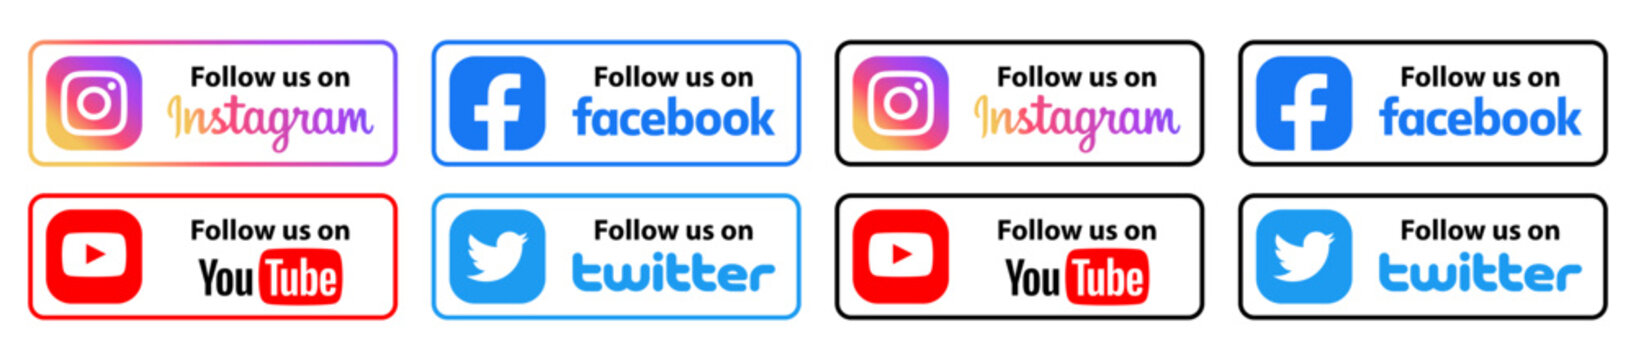 Social Media Icons,Facebook,Instagram,Twitter ,YouTube ,LinkedIn and Twitch with qr code ,follow us on social media.QR Code Scanner.Vector Editorial 